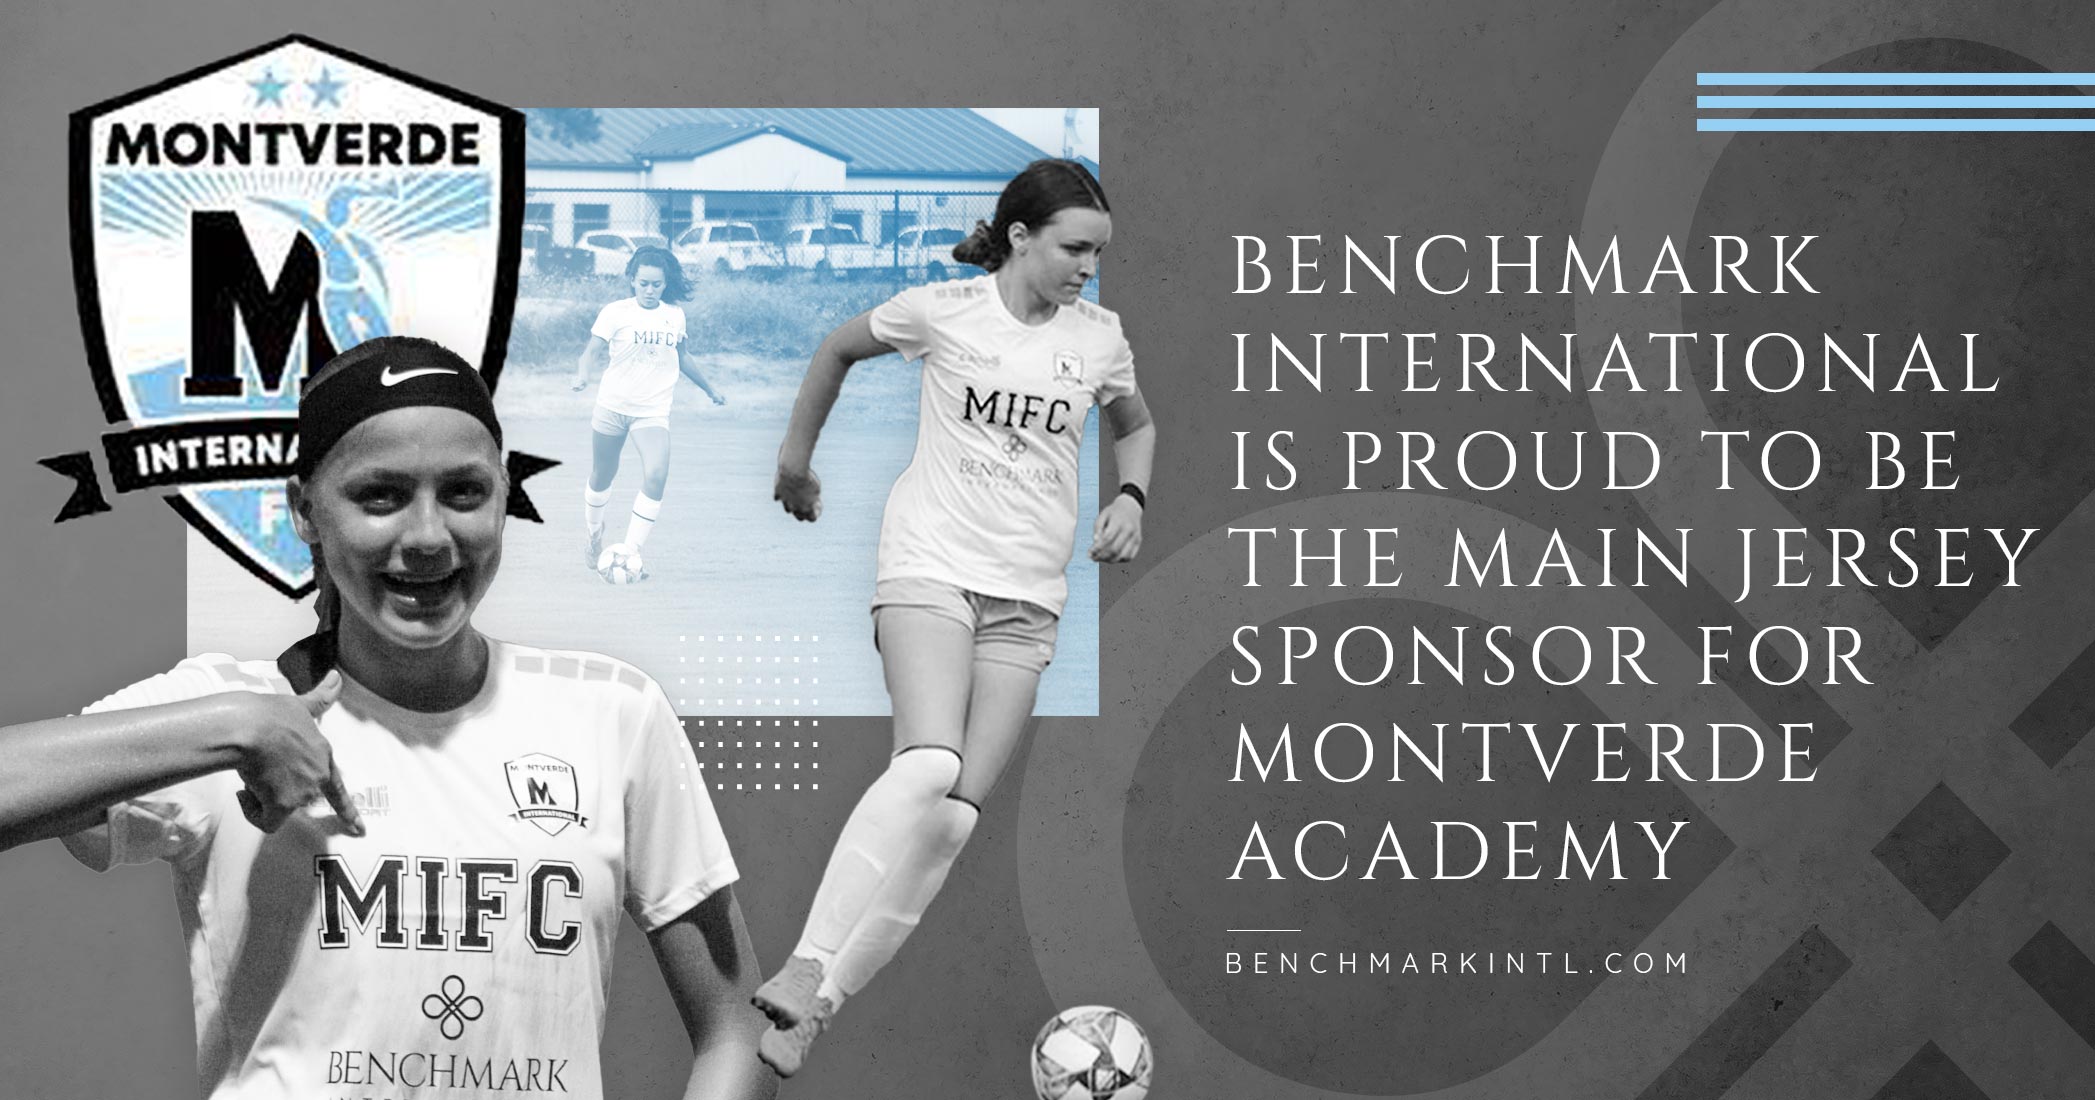 Benchmark International Is Proud To Be The Main Jersey Sponsor For Montverde Academy